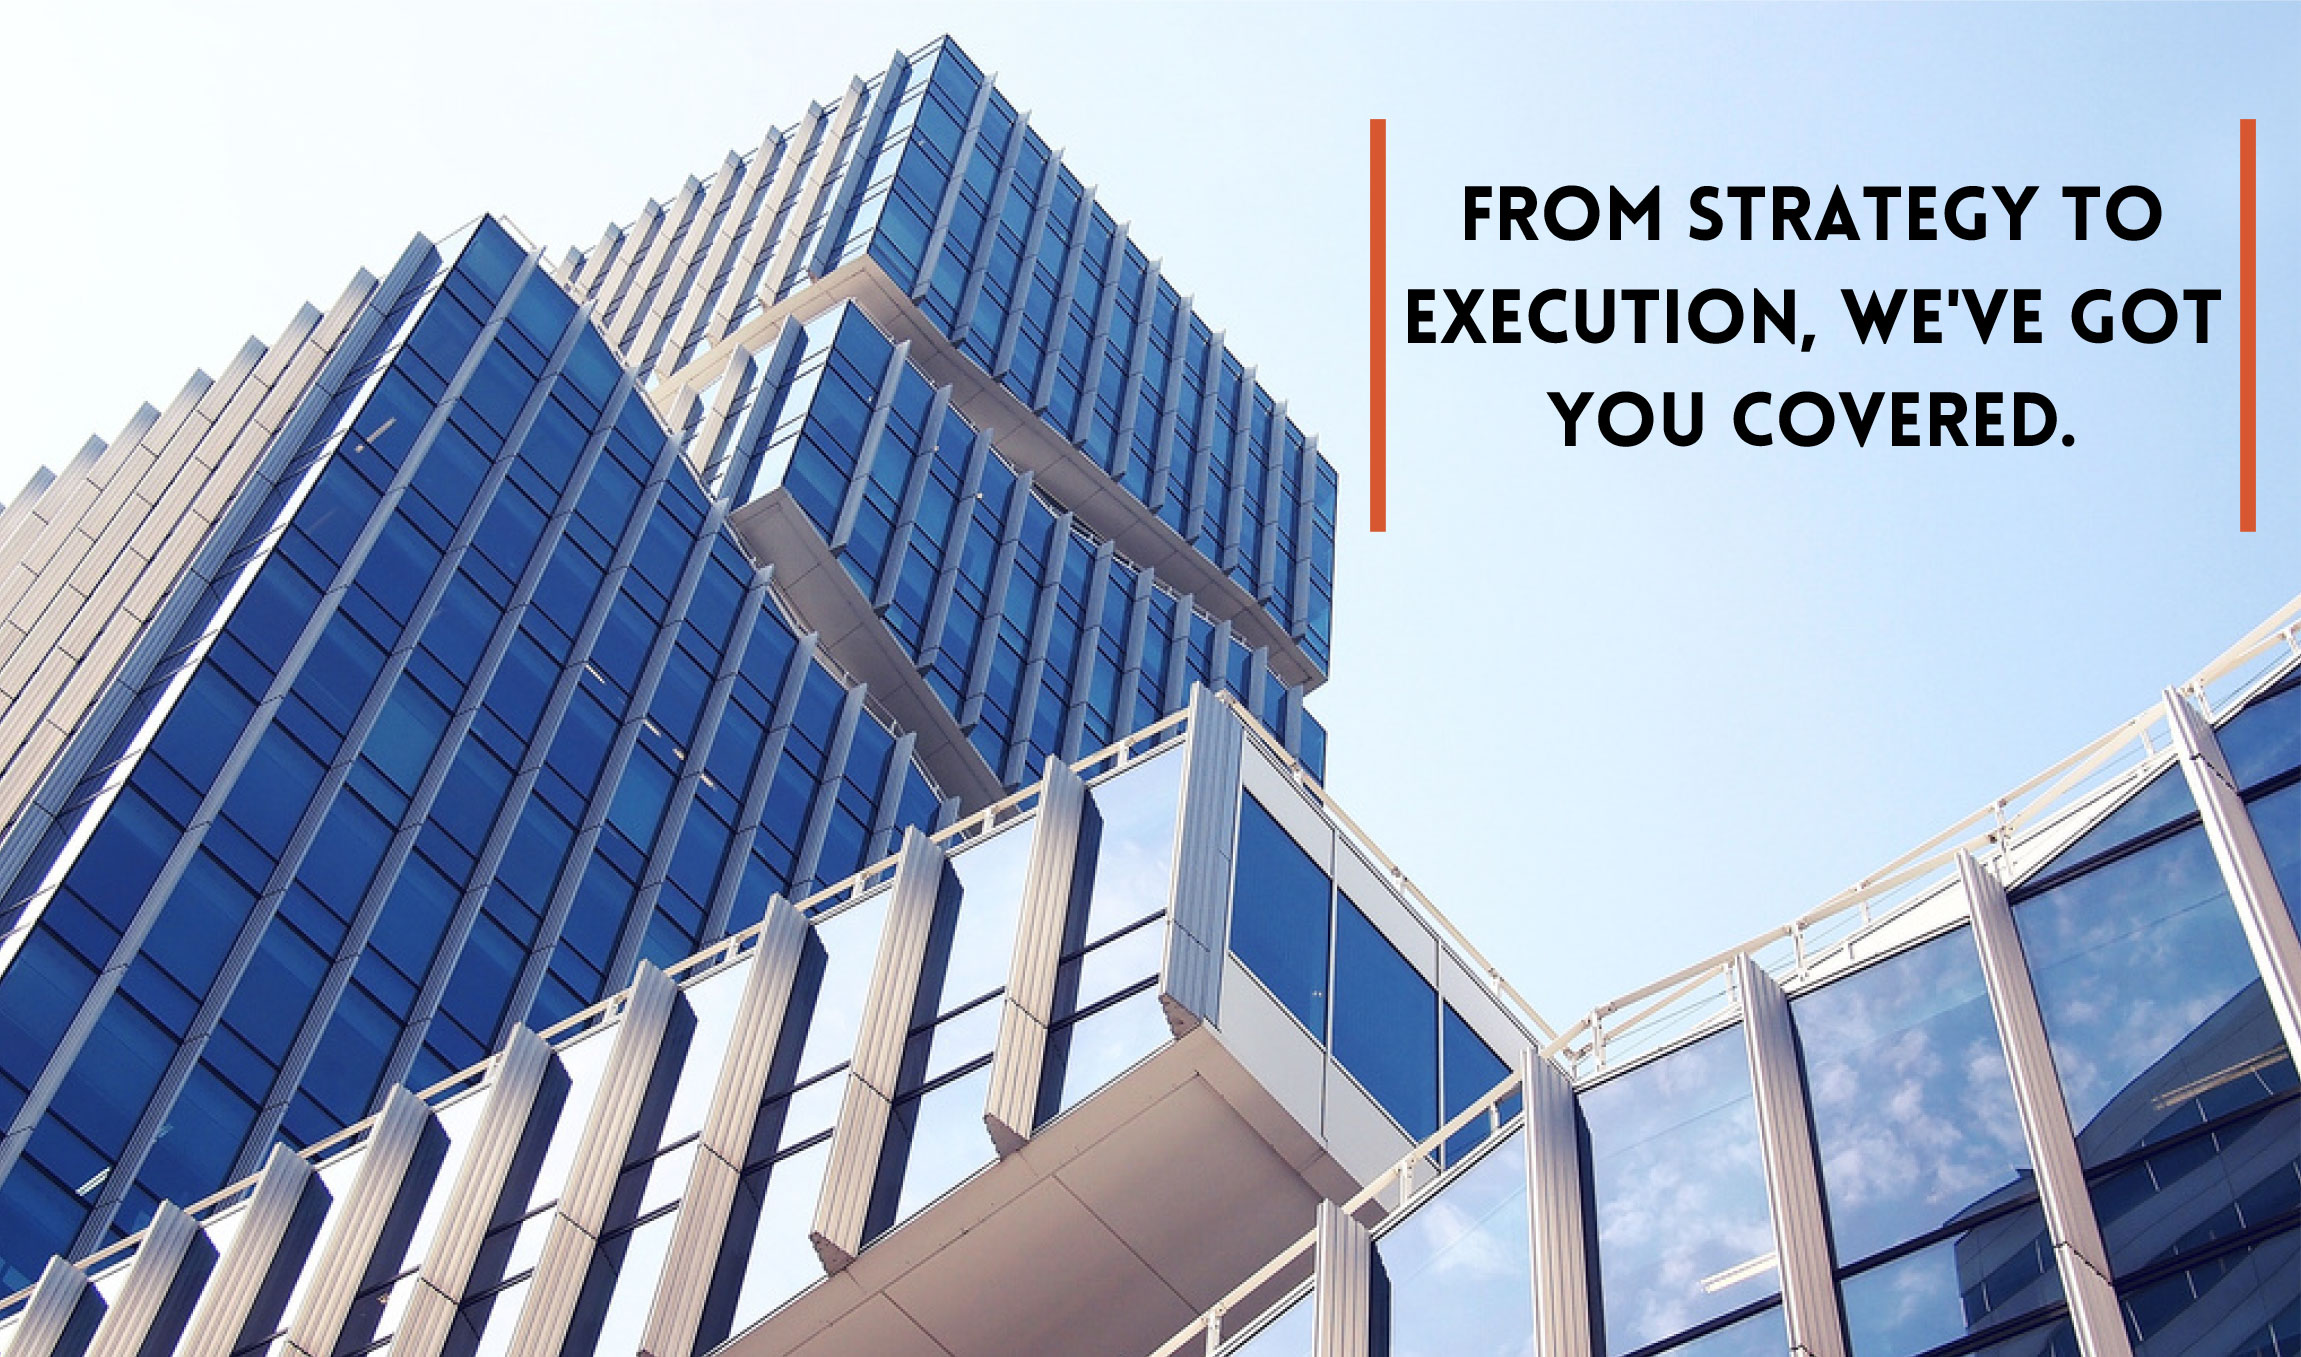 A picture of a building with "FROM STRATEGY TO EXECUTION, WE'VE GOT YOU COVERED." text